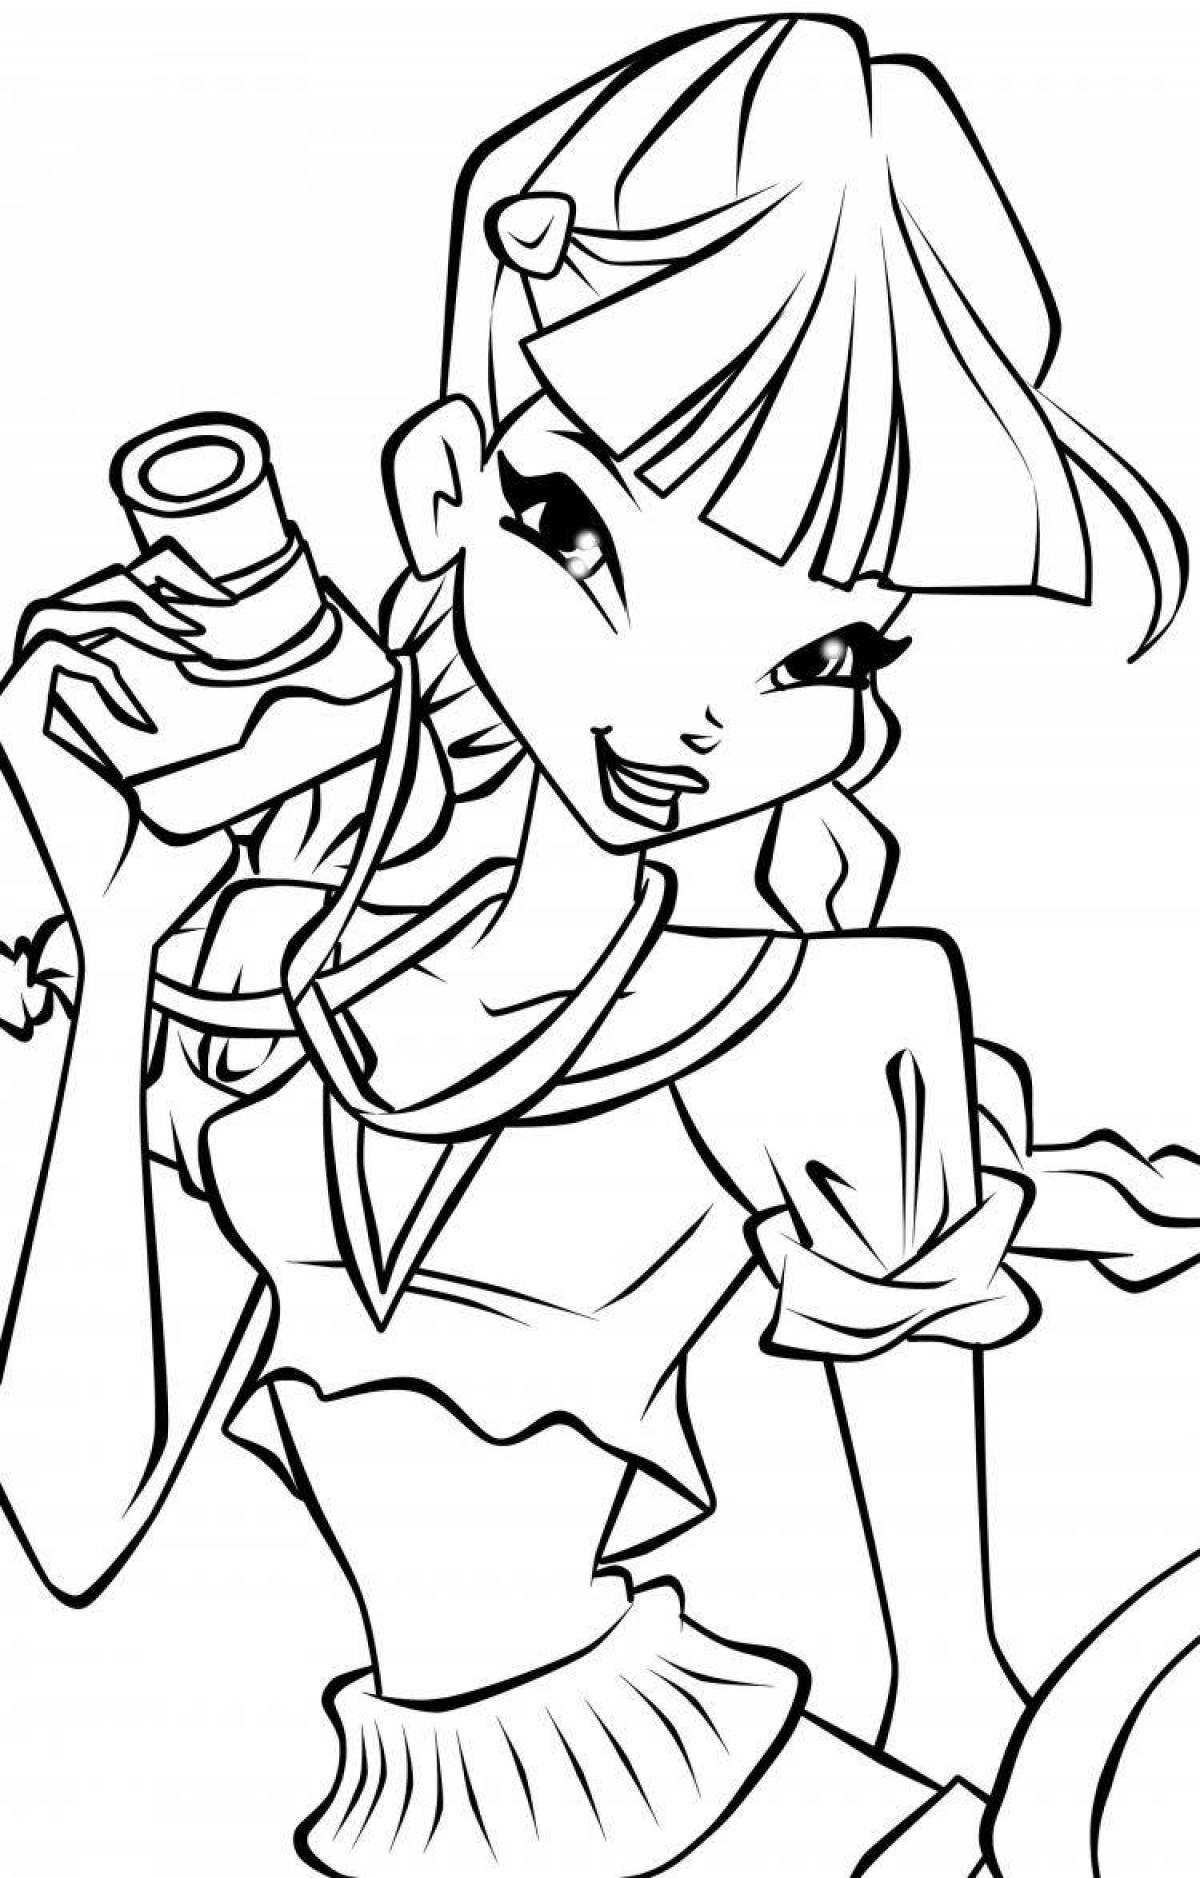 Silent coloring muse winx